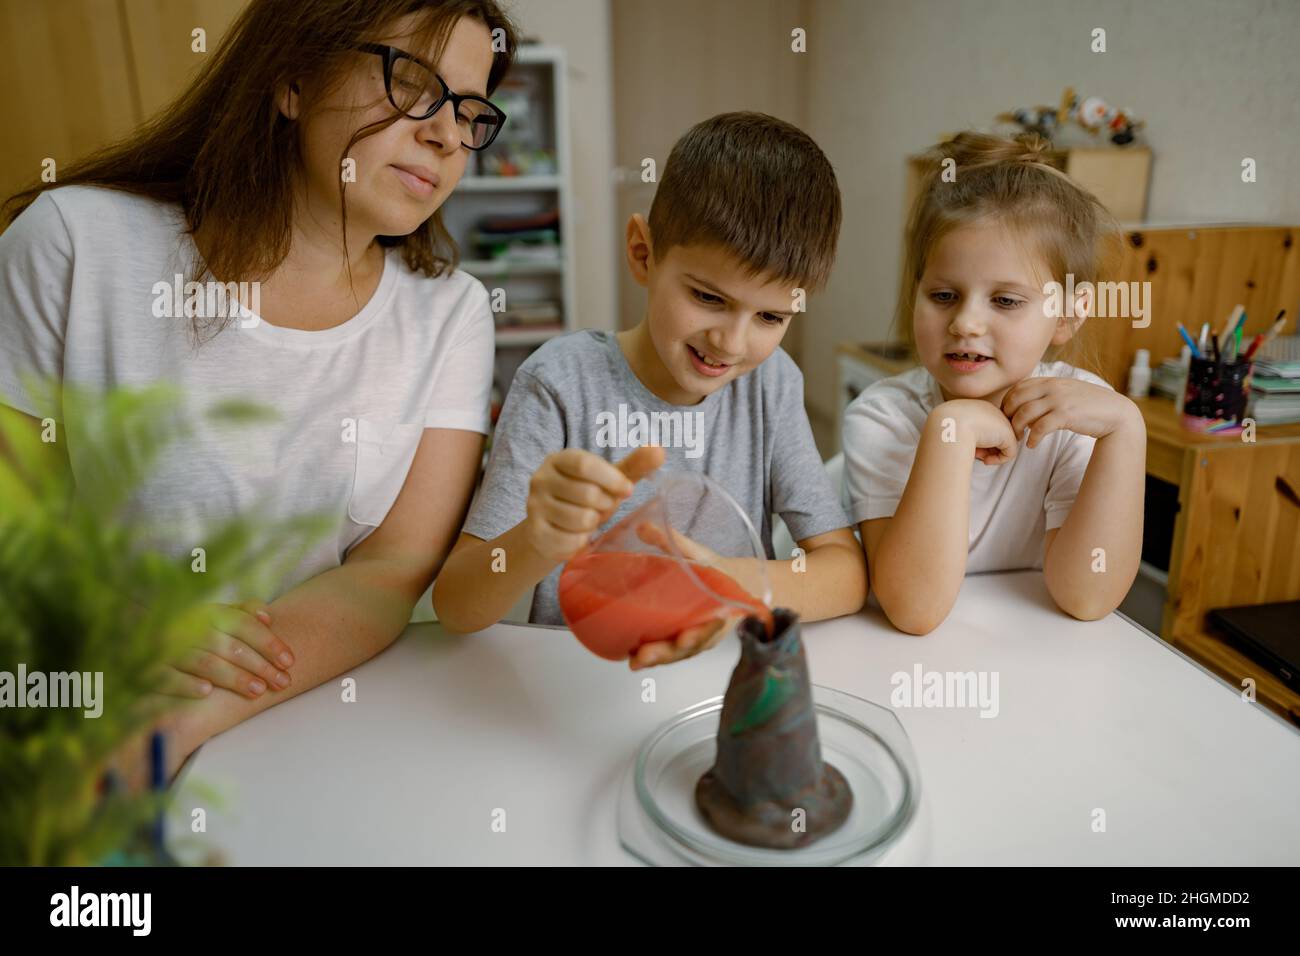 Mom and children at home are conducting an experiment with volcanic eruption. Boy pours liquid into volcanic and rejoices at reaction of eruption. Exp Stock Photo